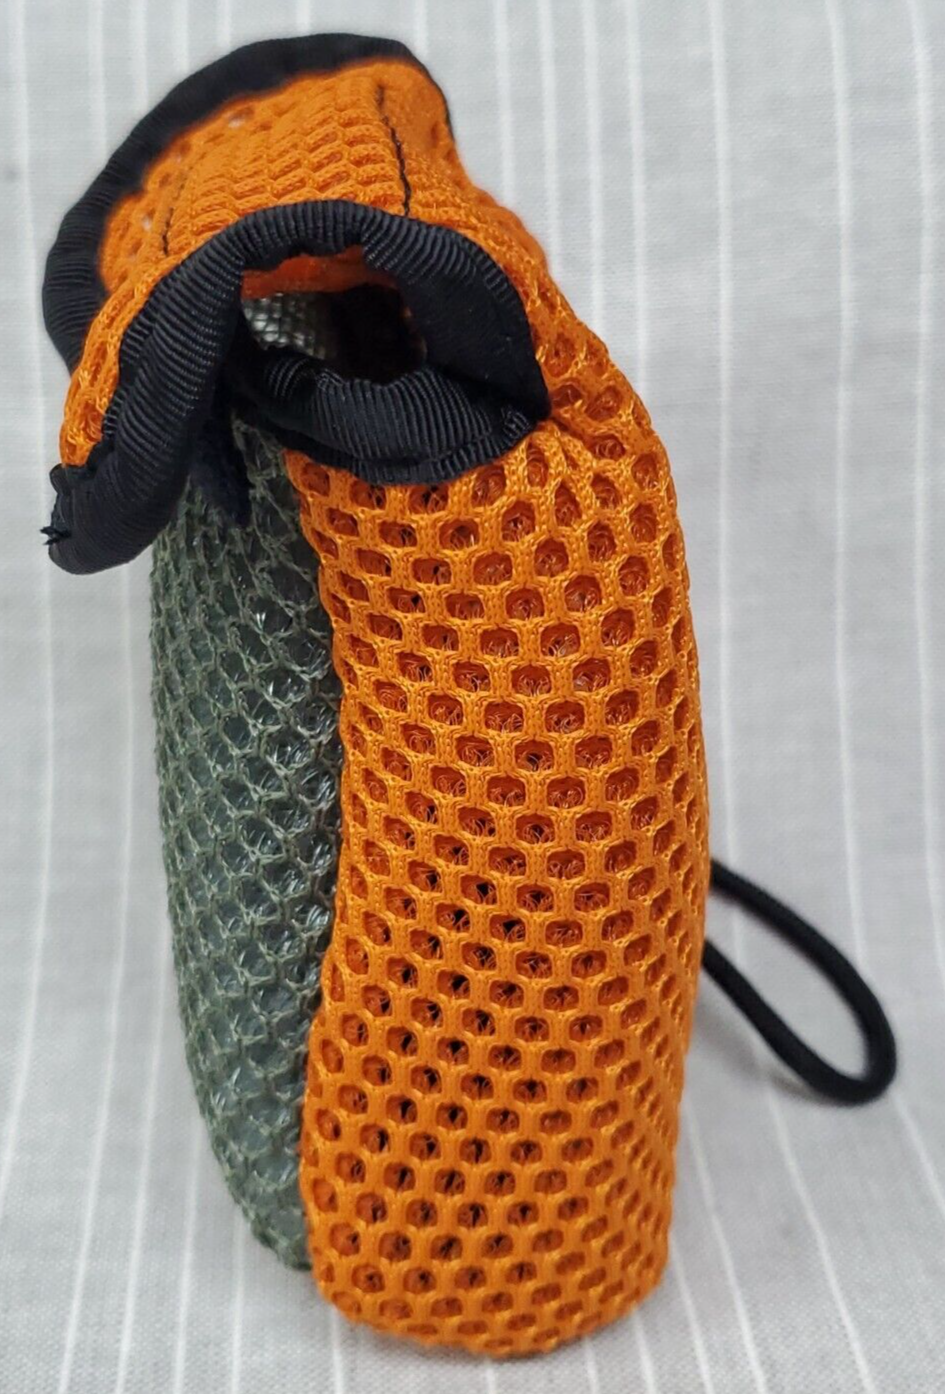 Soap On A Rope Tactical Soap Scrubber